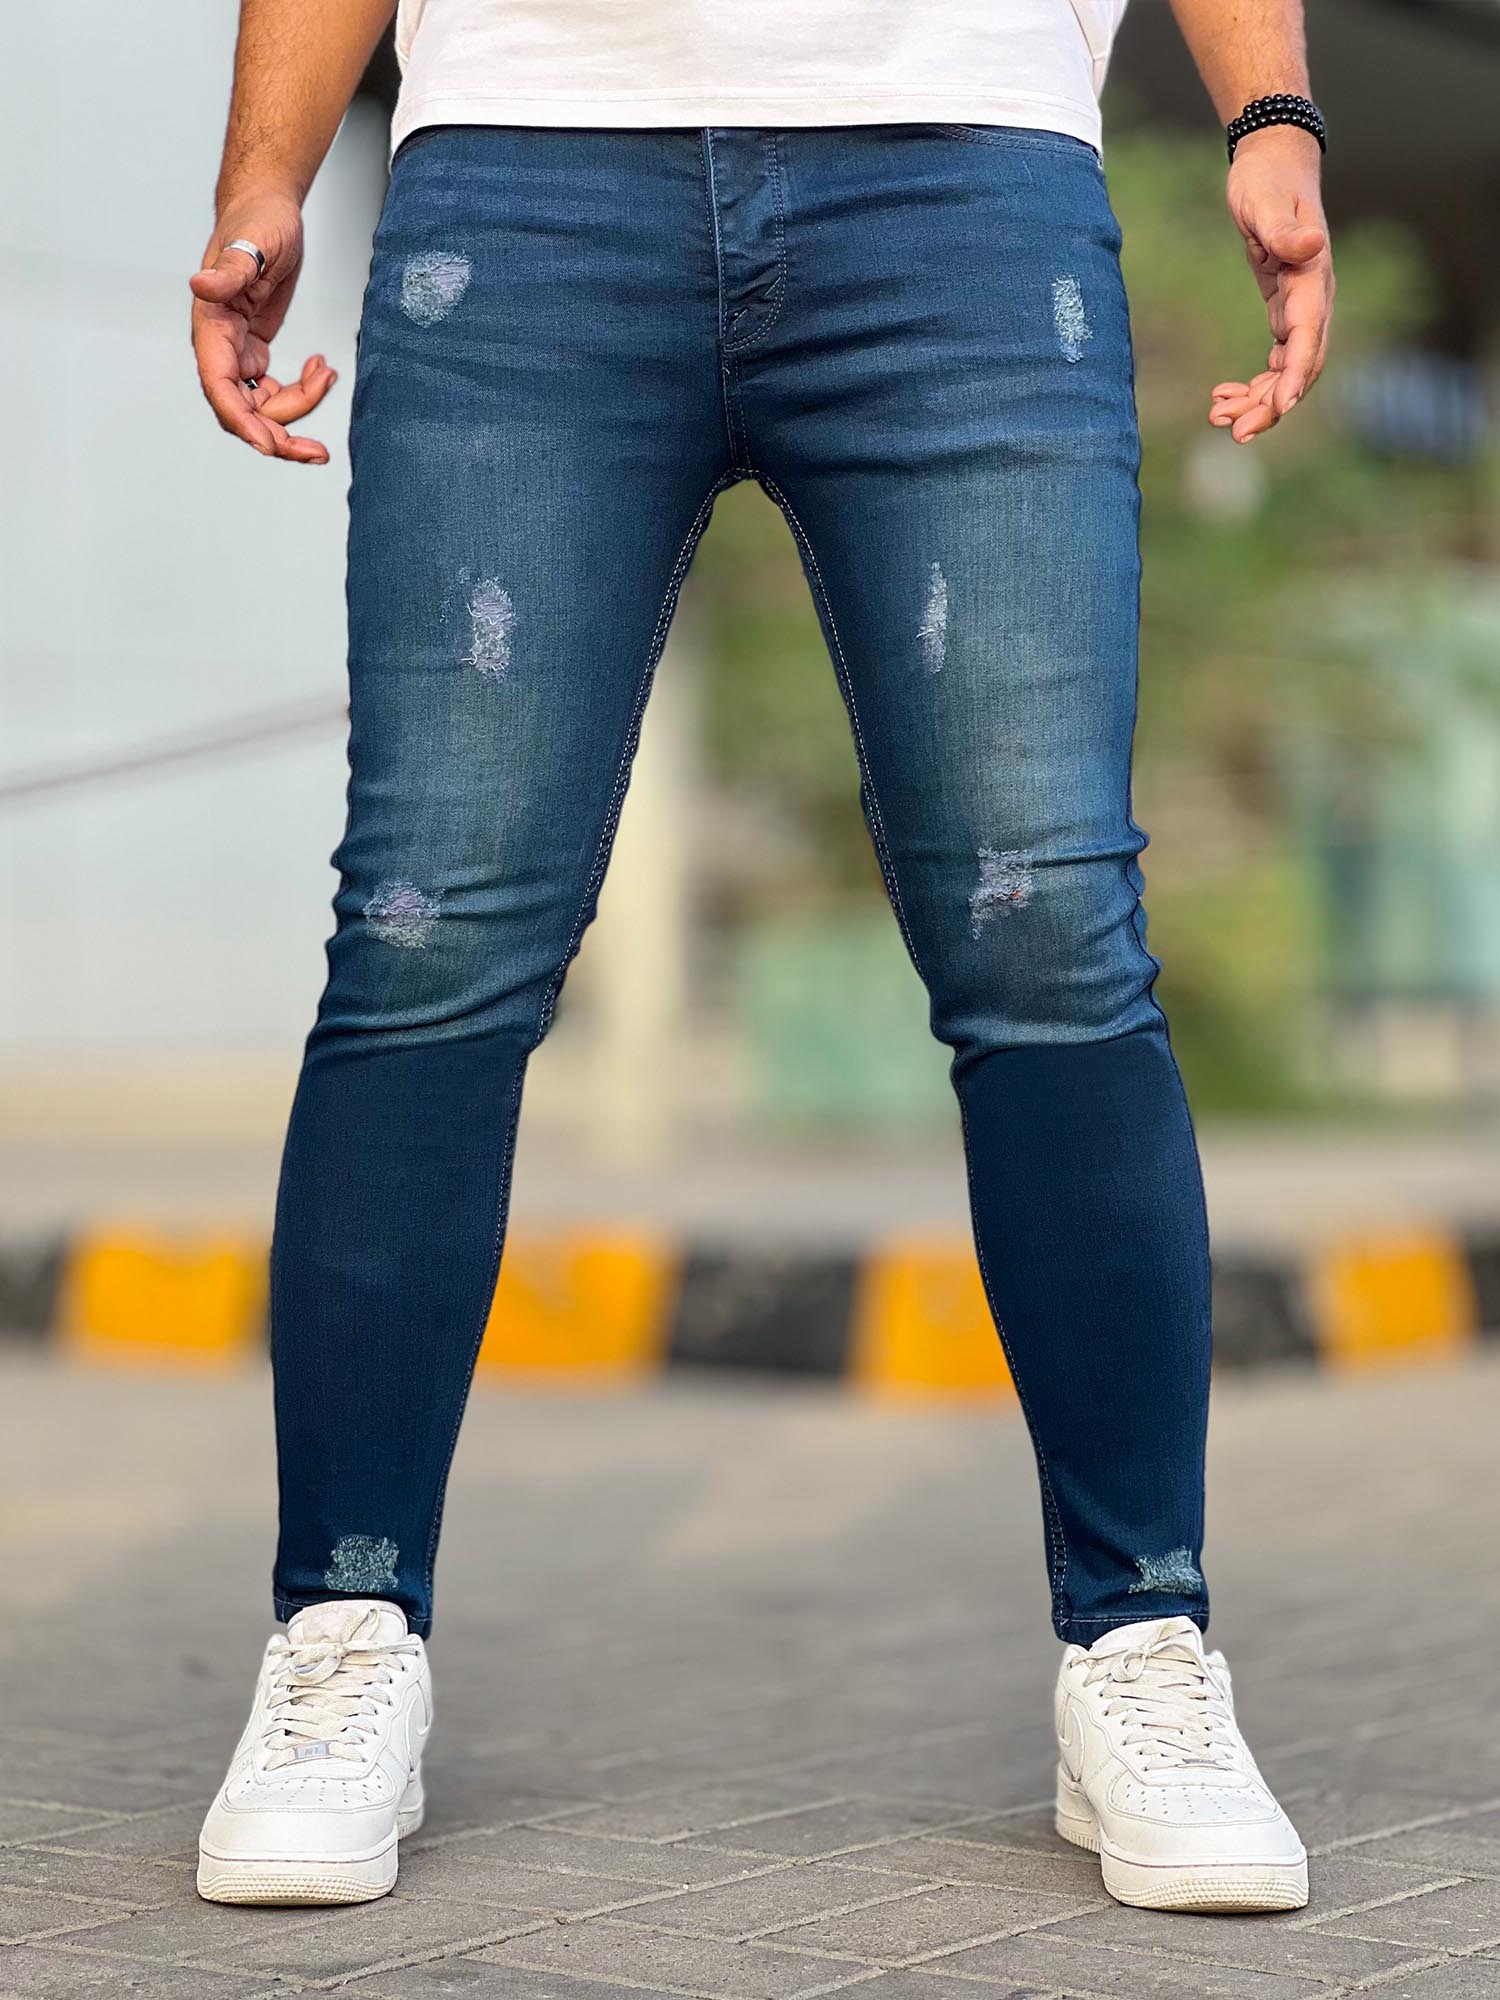 Turbo Rough Ankle Fit Jeans in Dirty Blue